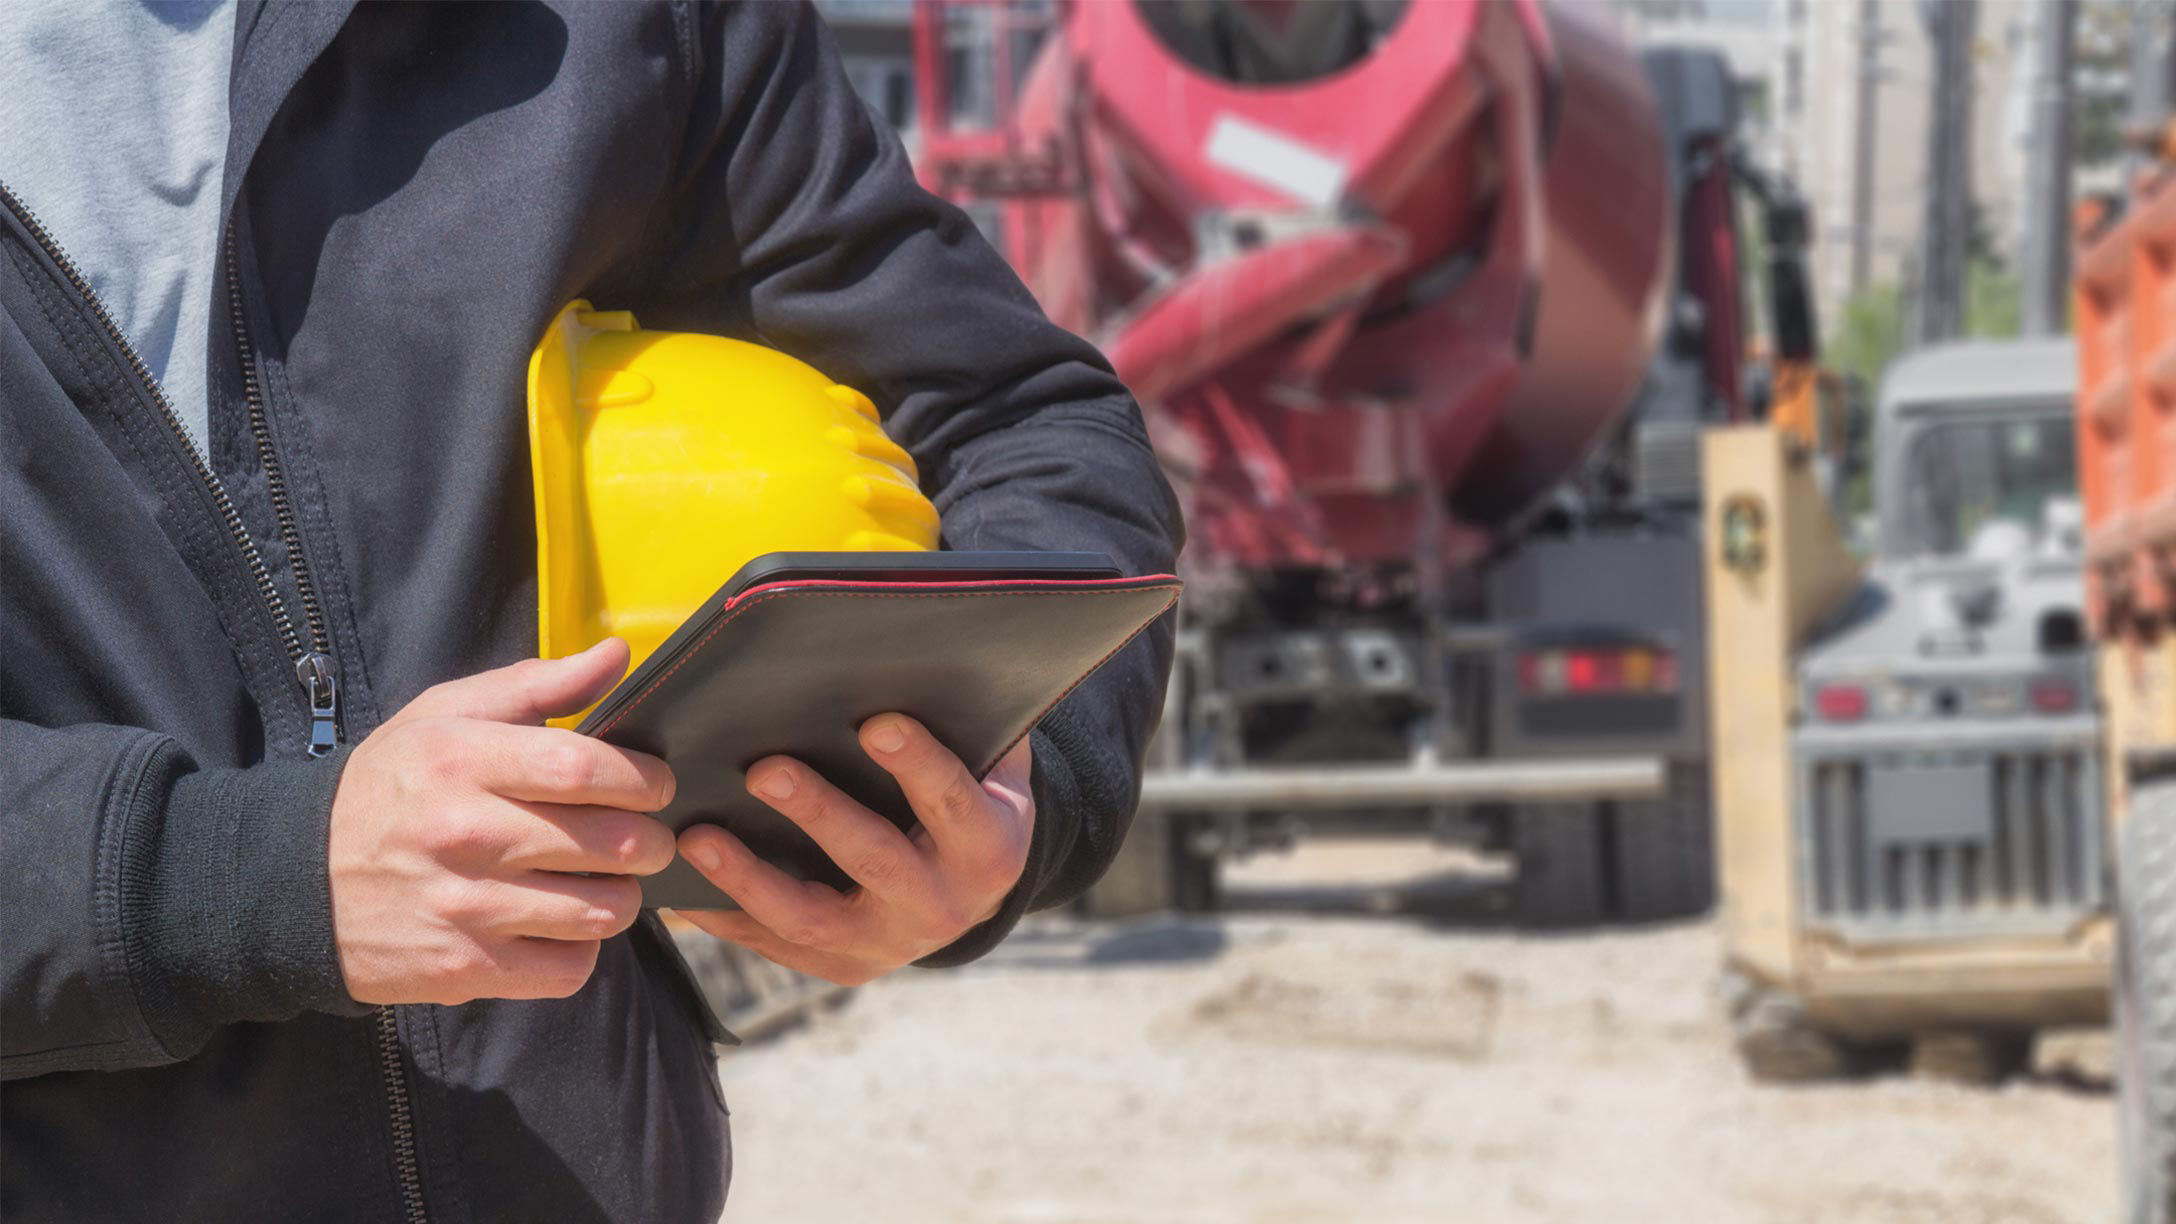 Man holding a hard hat and a tablet in front of trucks outside